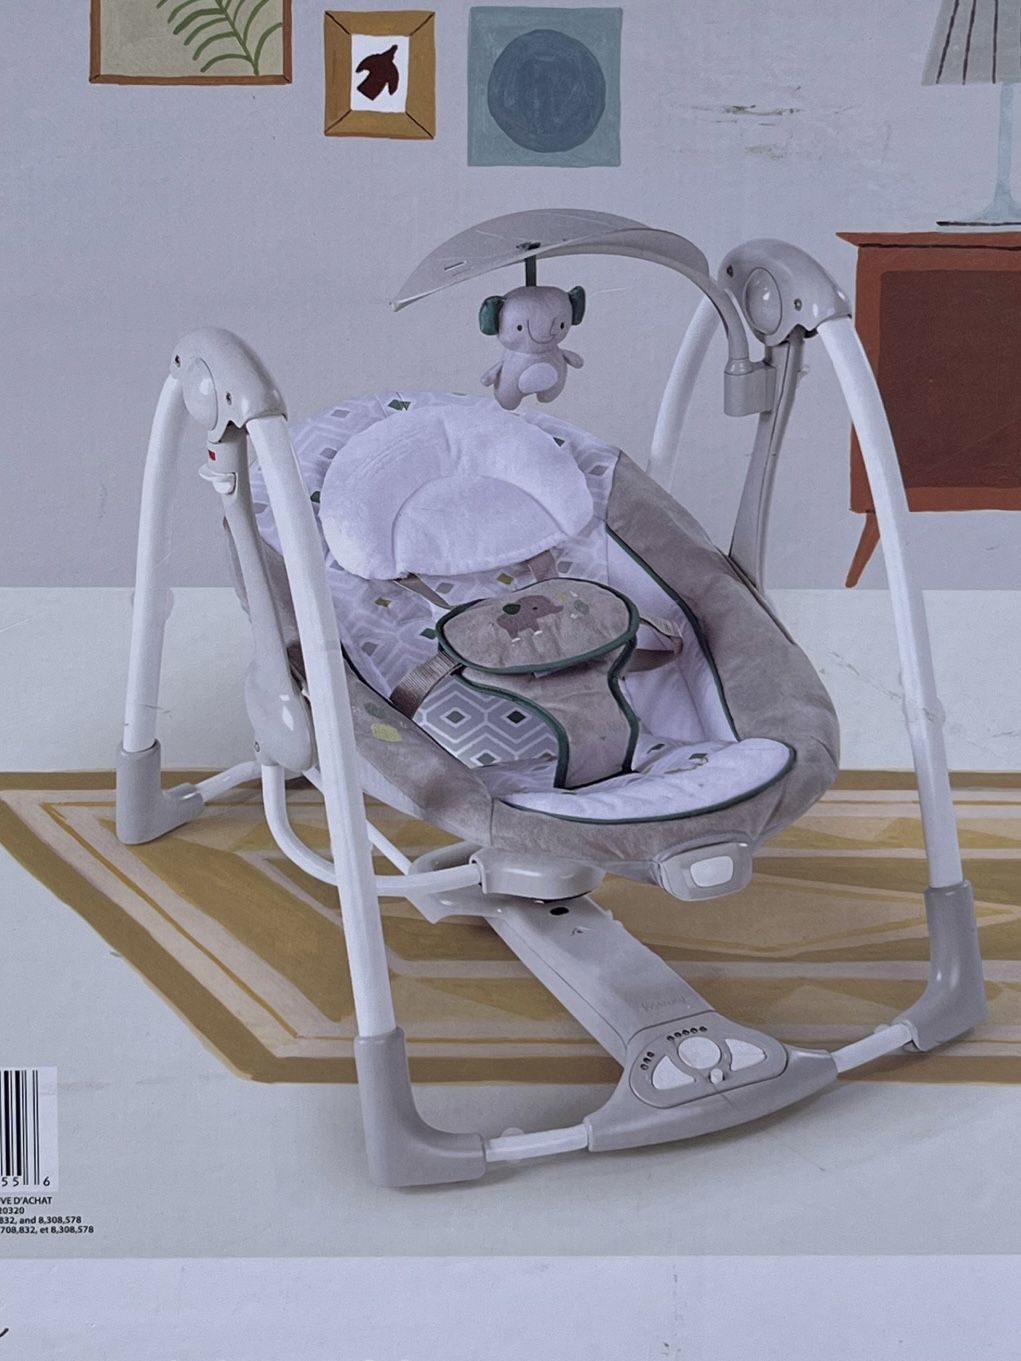 Ingenuity Convert Me 2-in-1 Portable Vibrating Baby Swing 